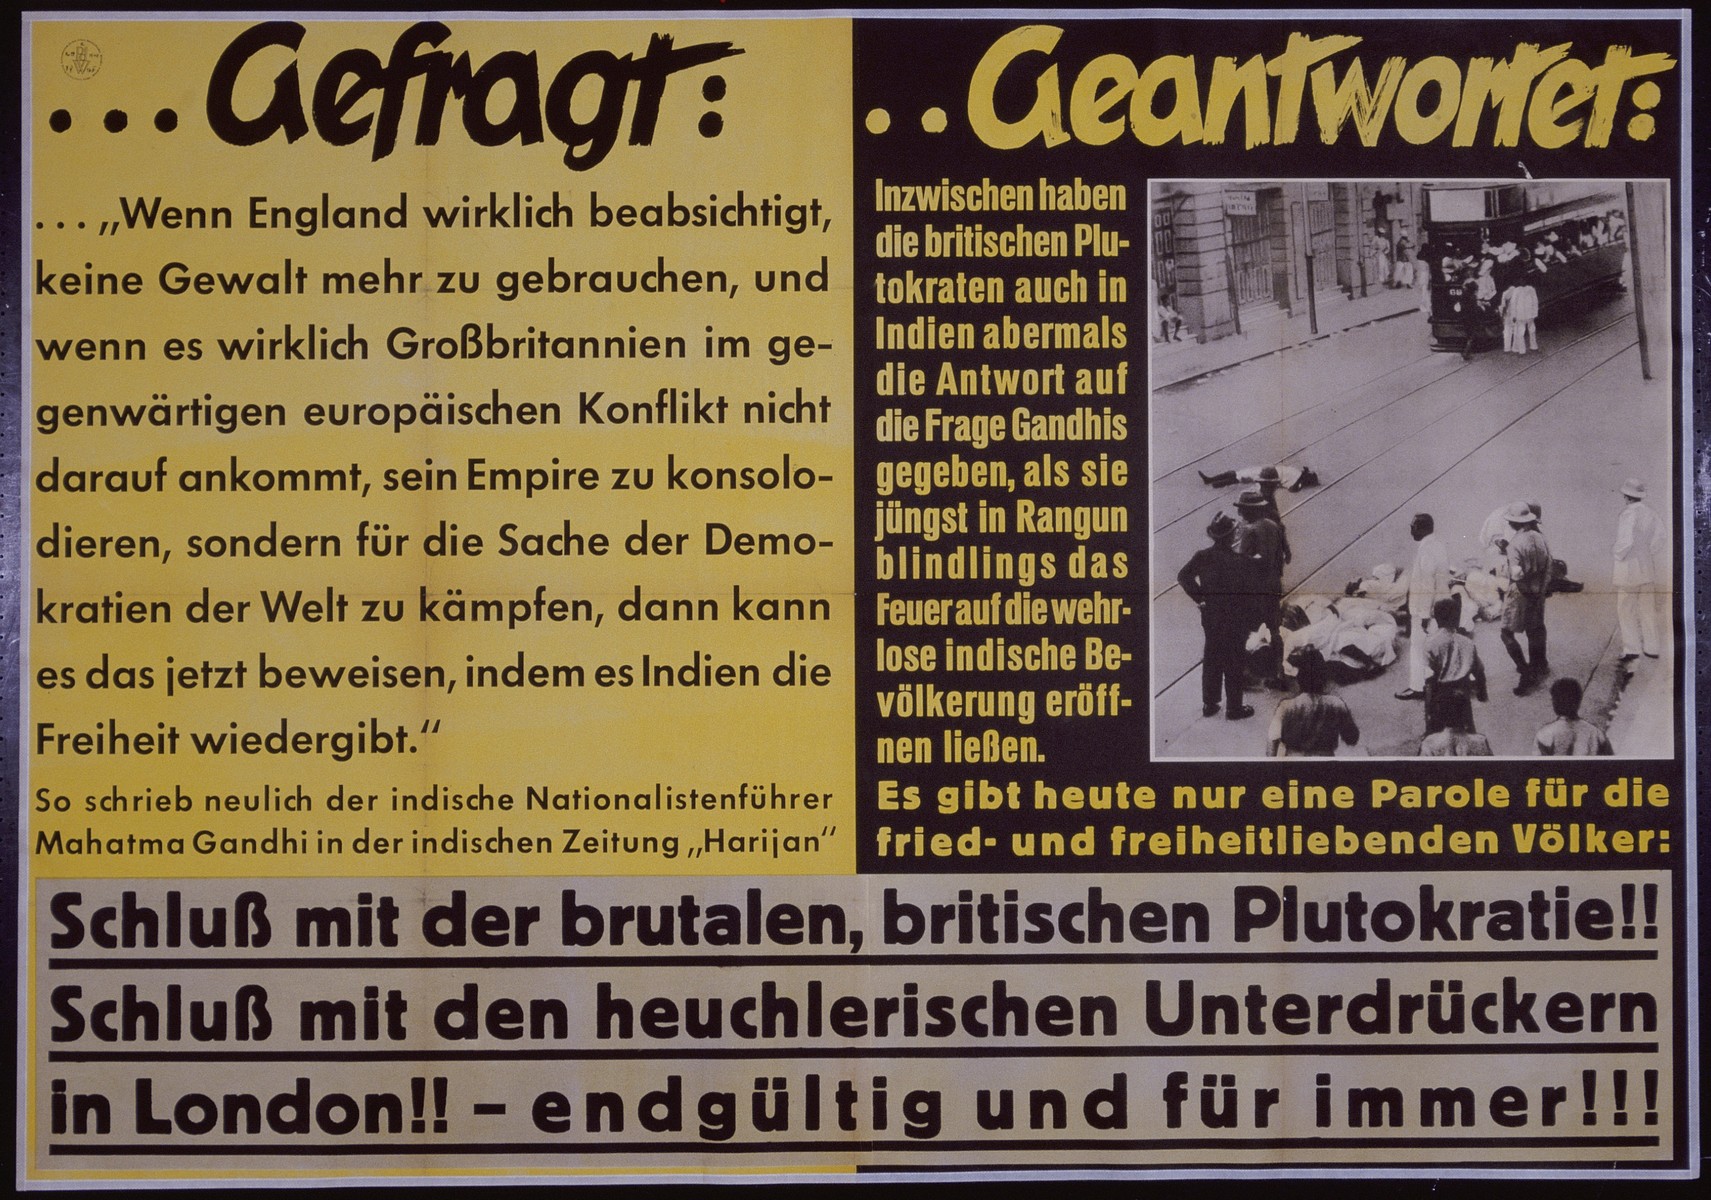 Nazi propaganda poster entitled, "...Gefragt...Geantwortet," issued by the "Parole der Woche," a wall newspaper (Wandzeitung) published by the National Socialist Party propaganda office in Munich.